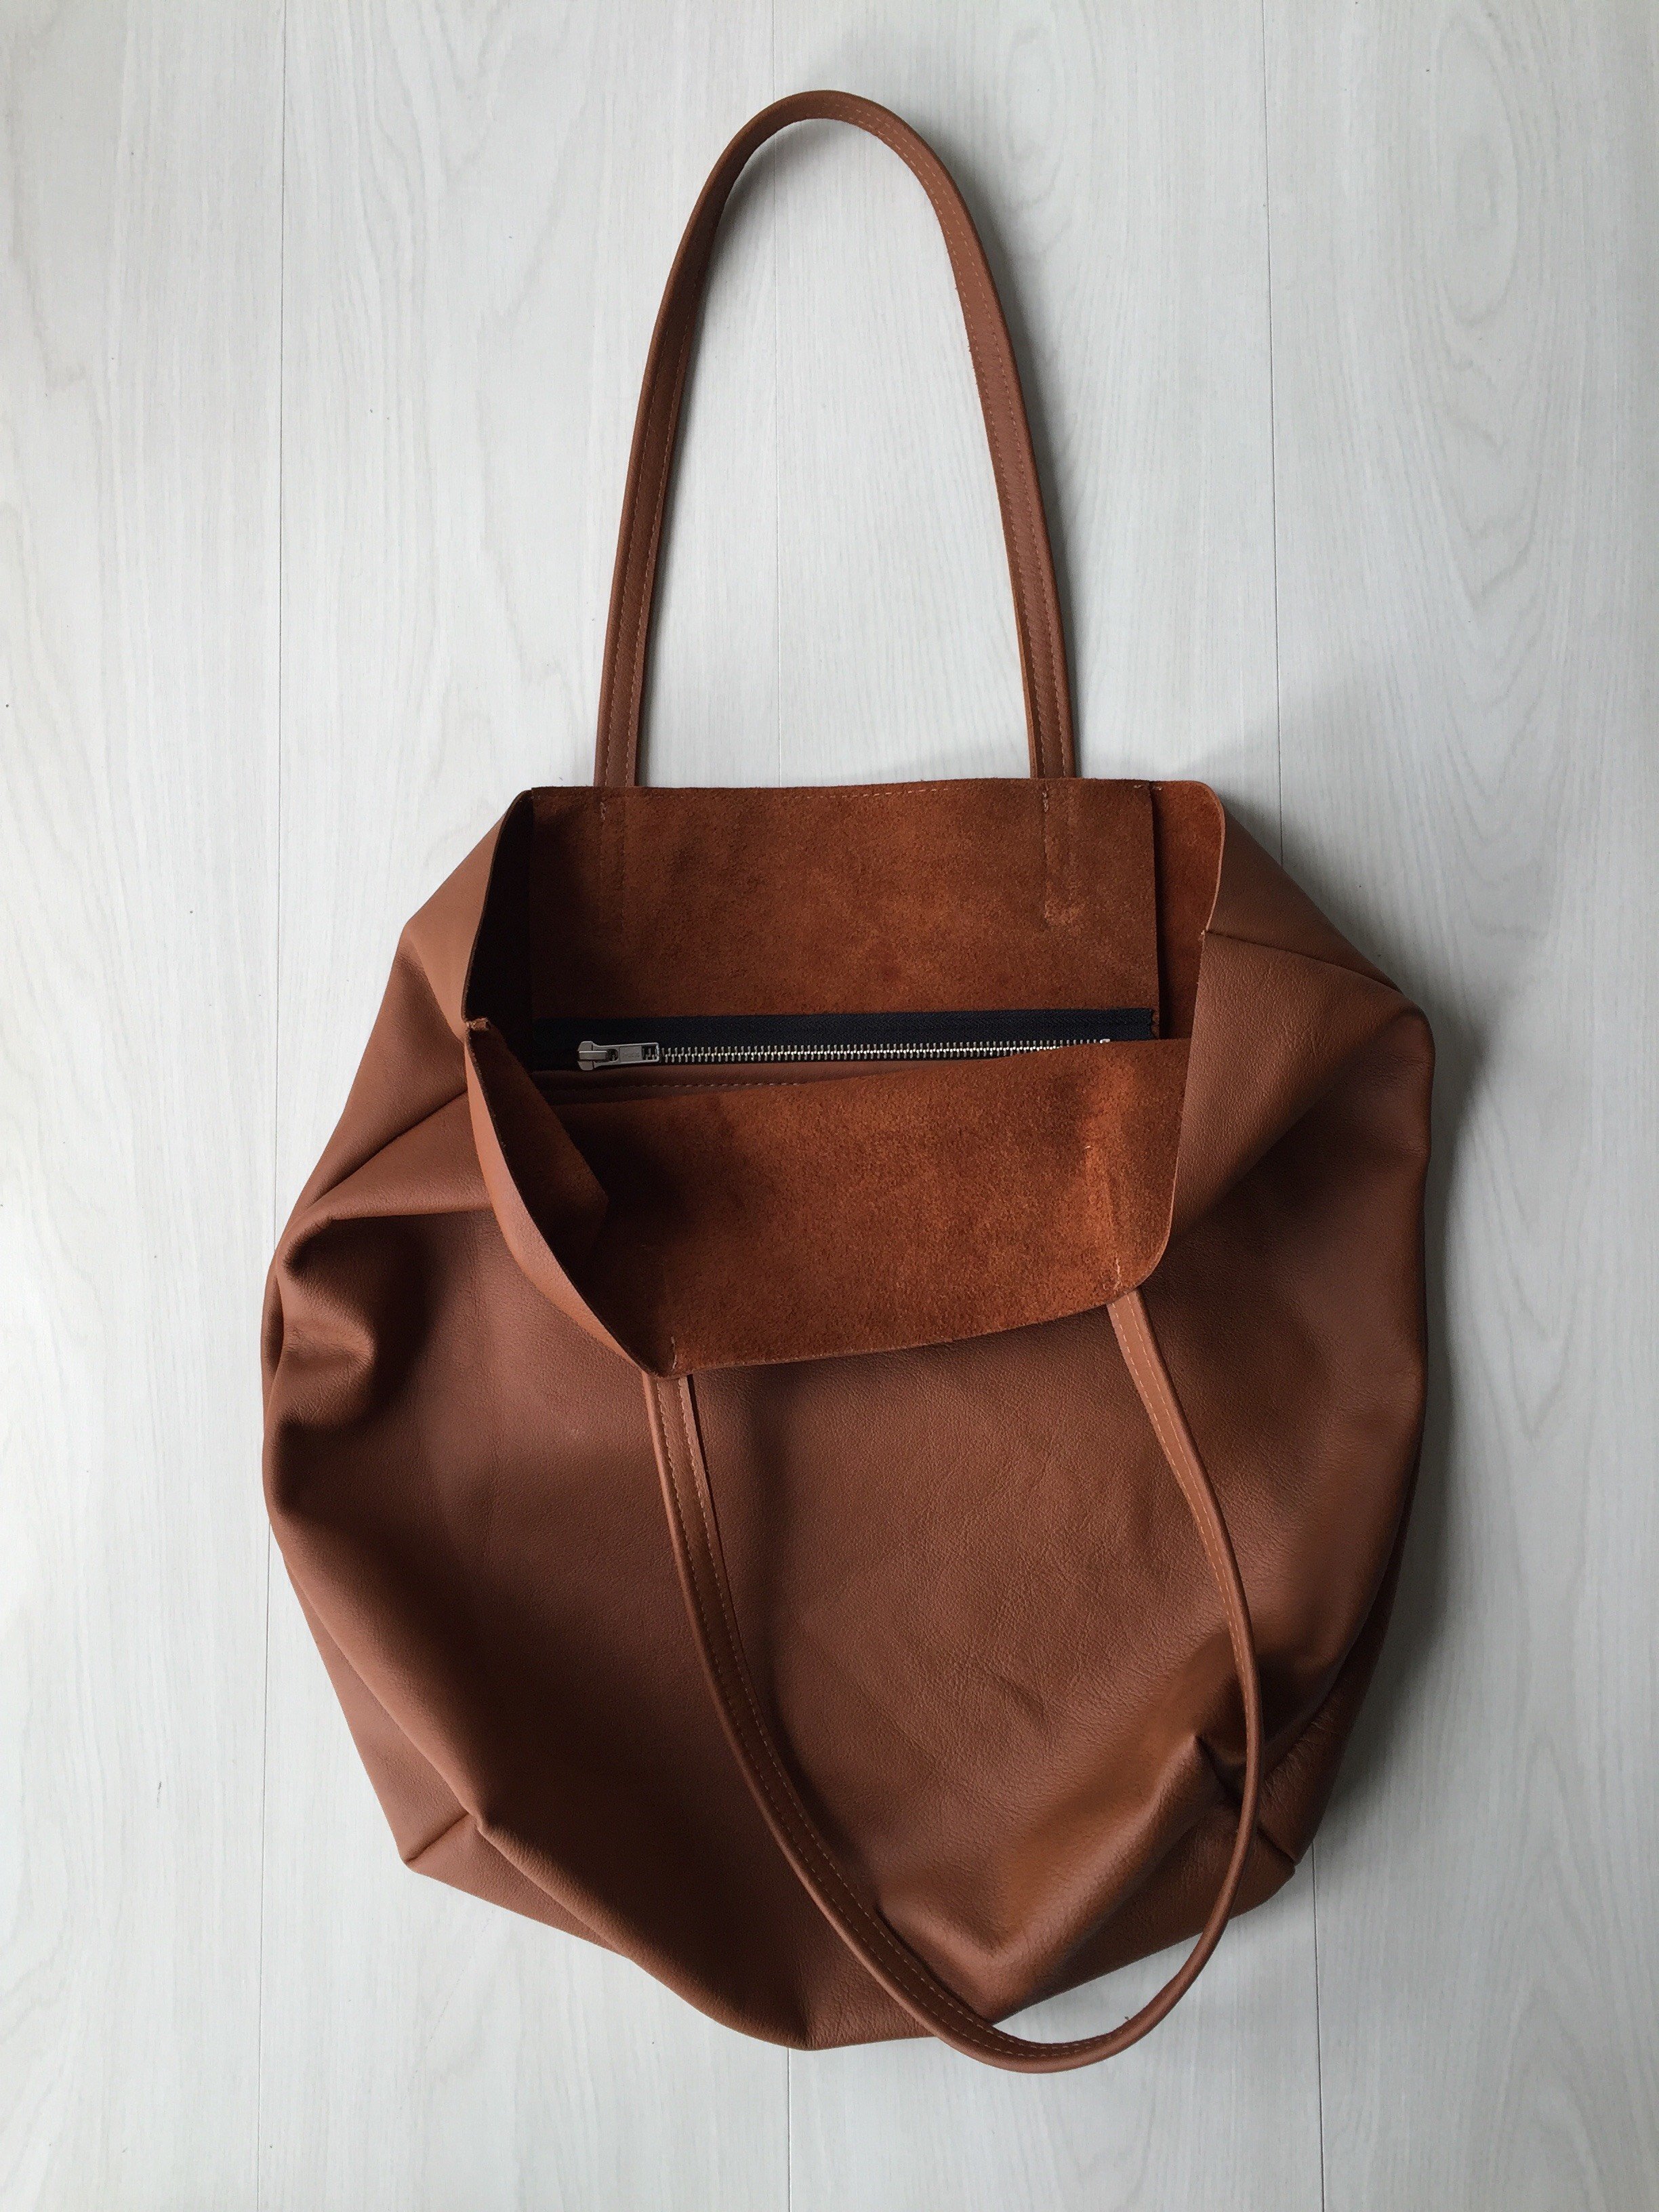 Raw Leather Tote Bag - Cognac Leather